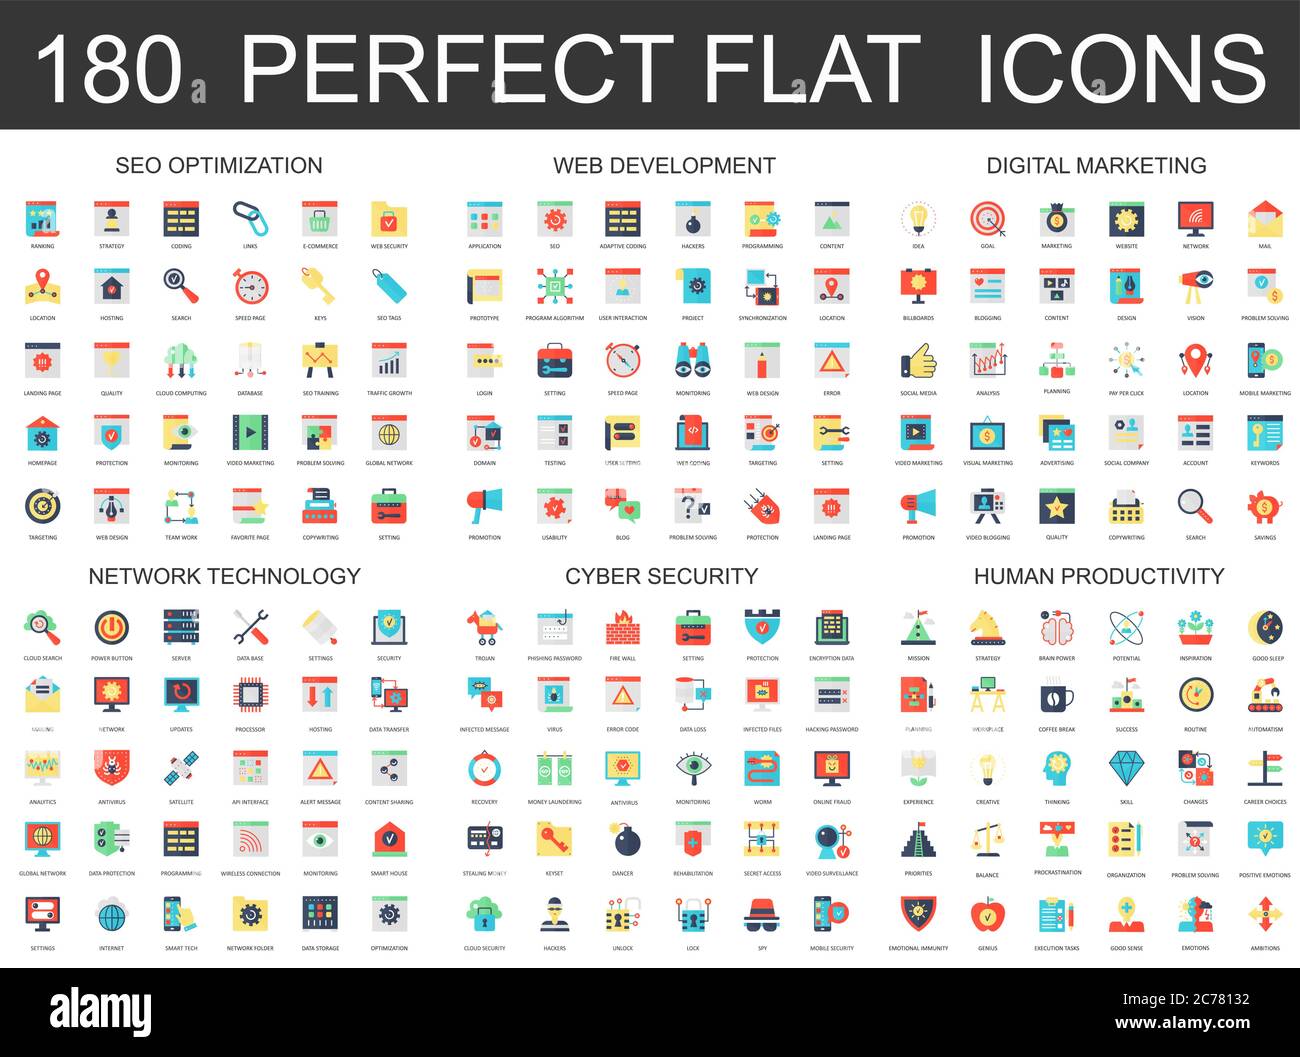 180 modern flat icons set of seo optimization, web development, digital marketing, network technology, cyber security and productivity icons Stock Vector